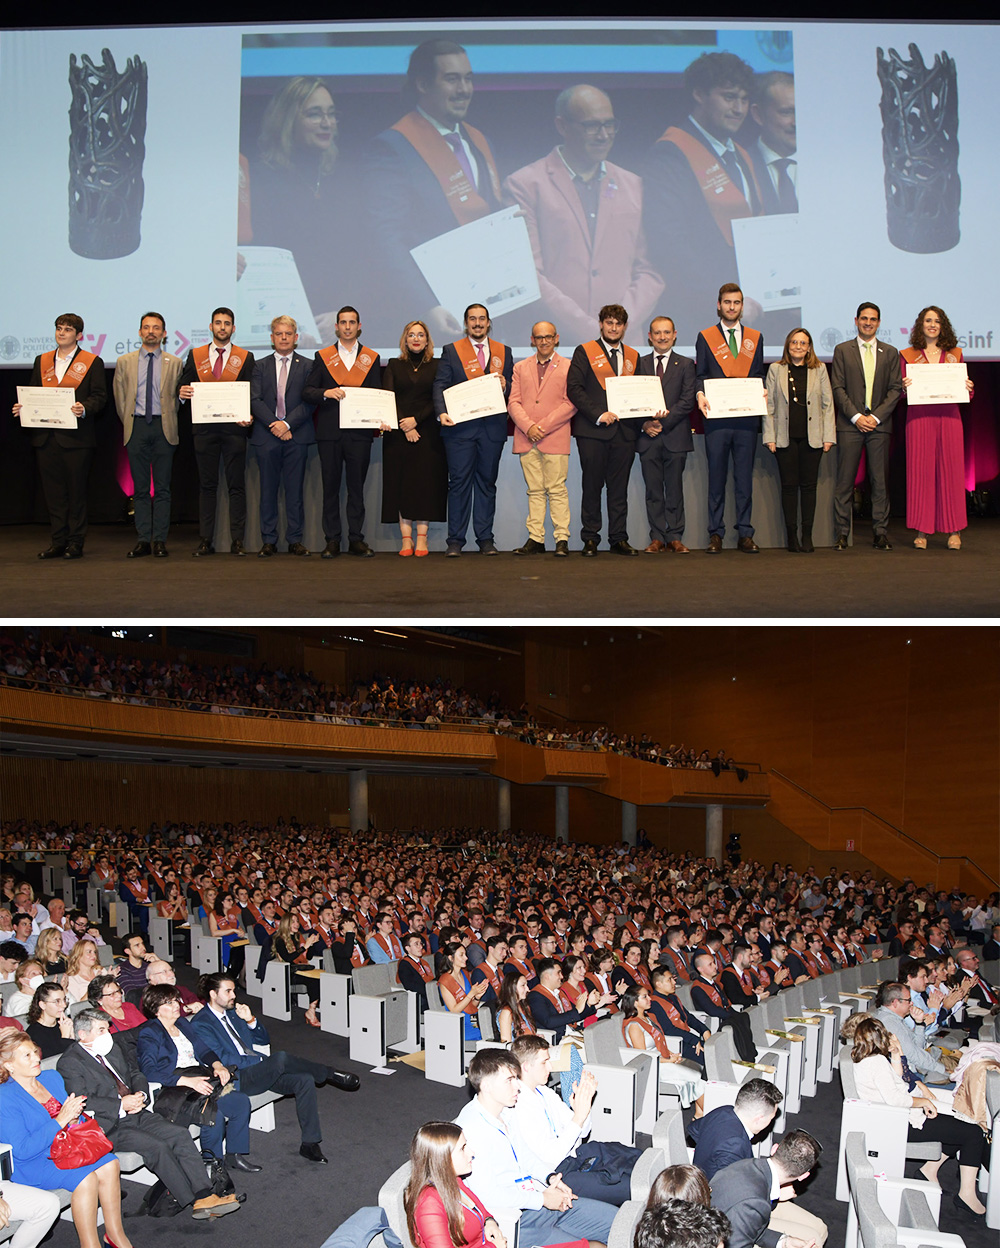 Management Solutions sponsors the 2022 ETSINF Graduation Ceremony at the UPV